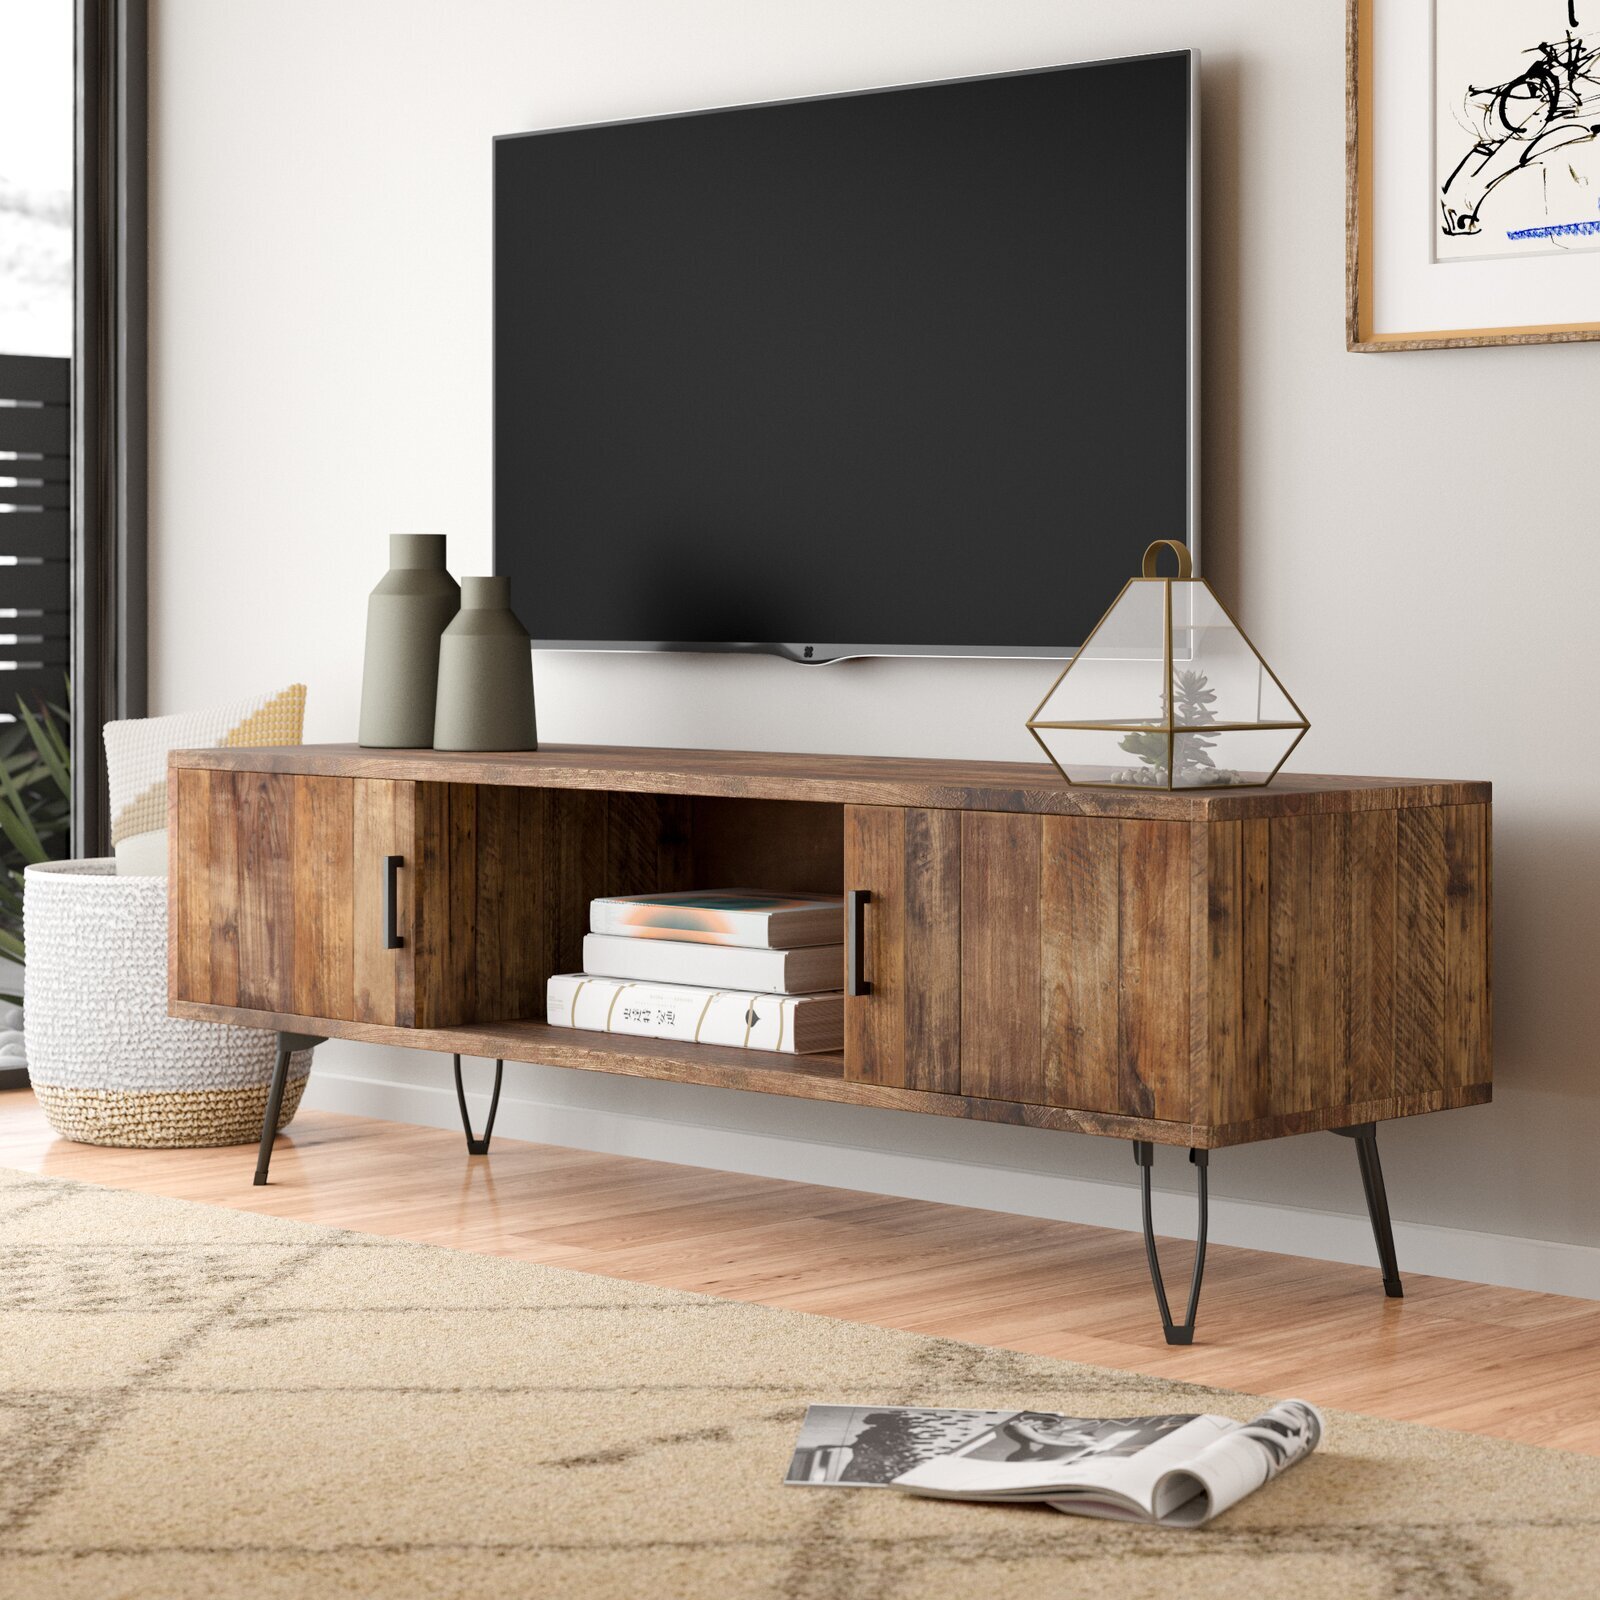 Industrial chic low profile entertainment center